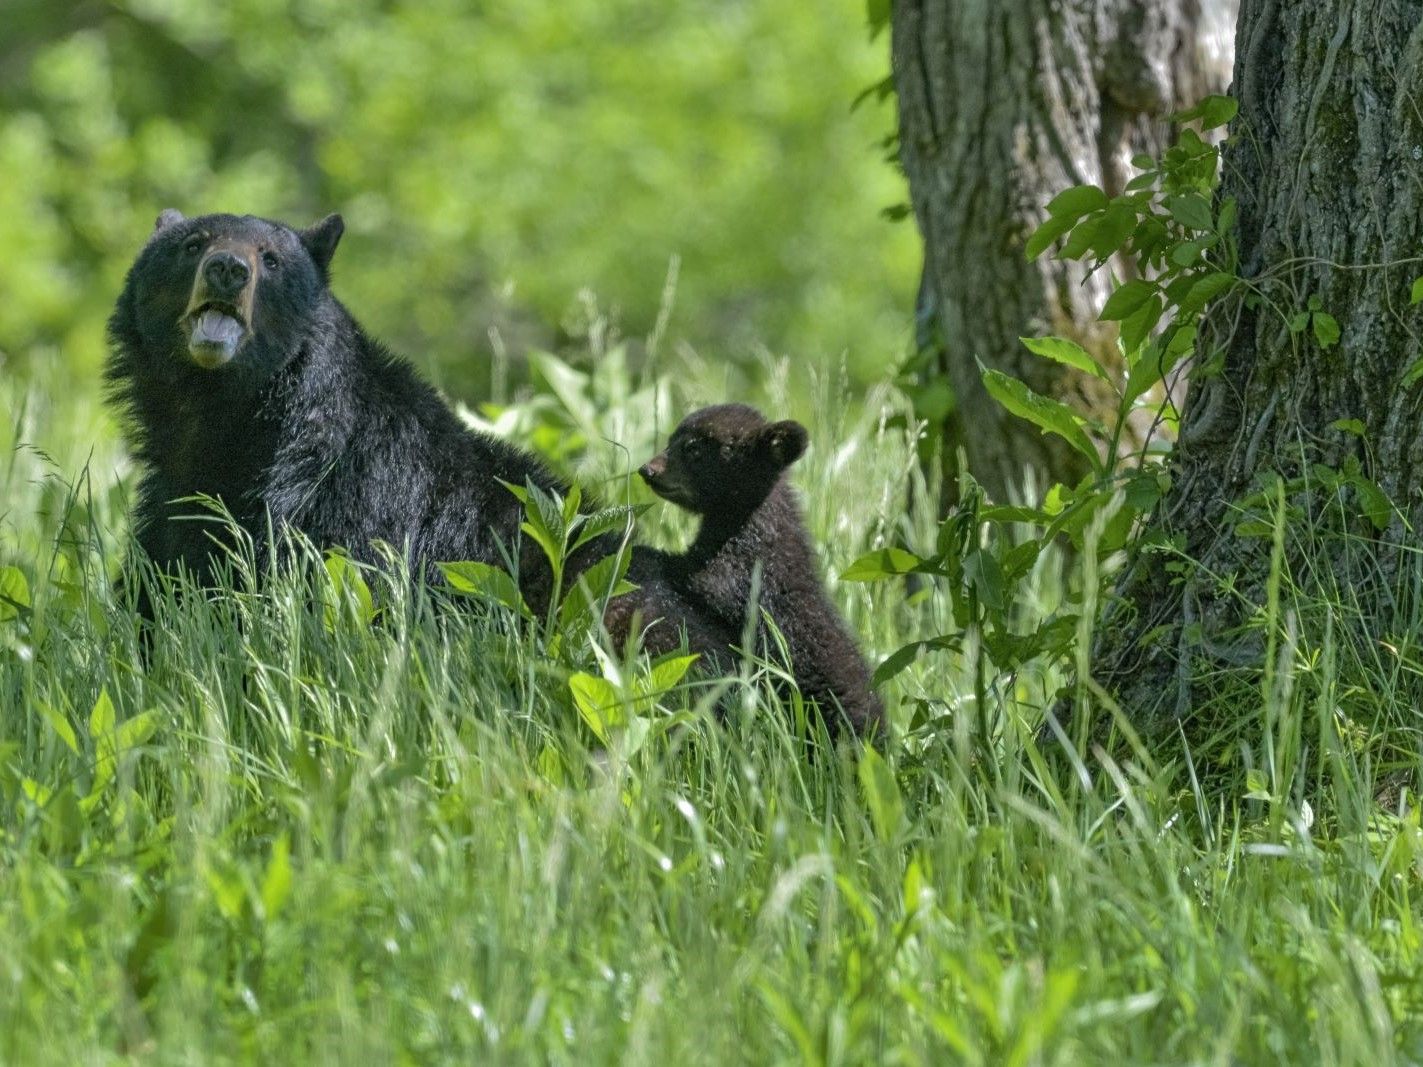 big-small-bear-playing-together-forest-sunlight.jpg